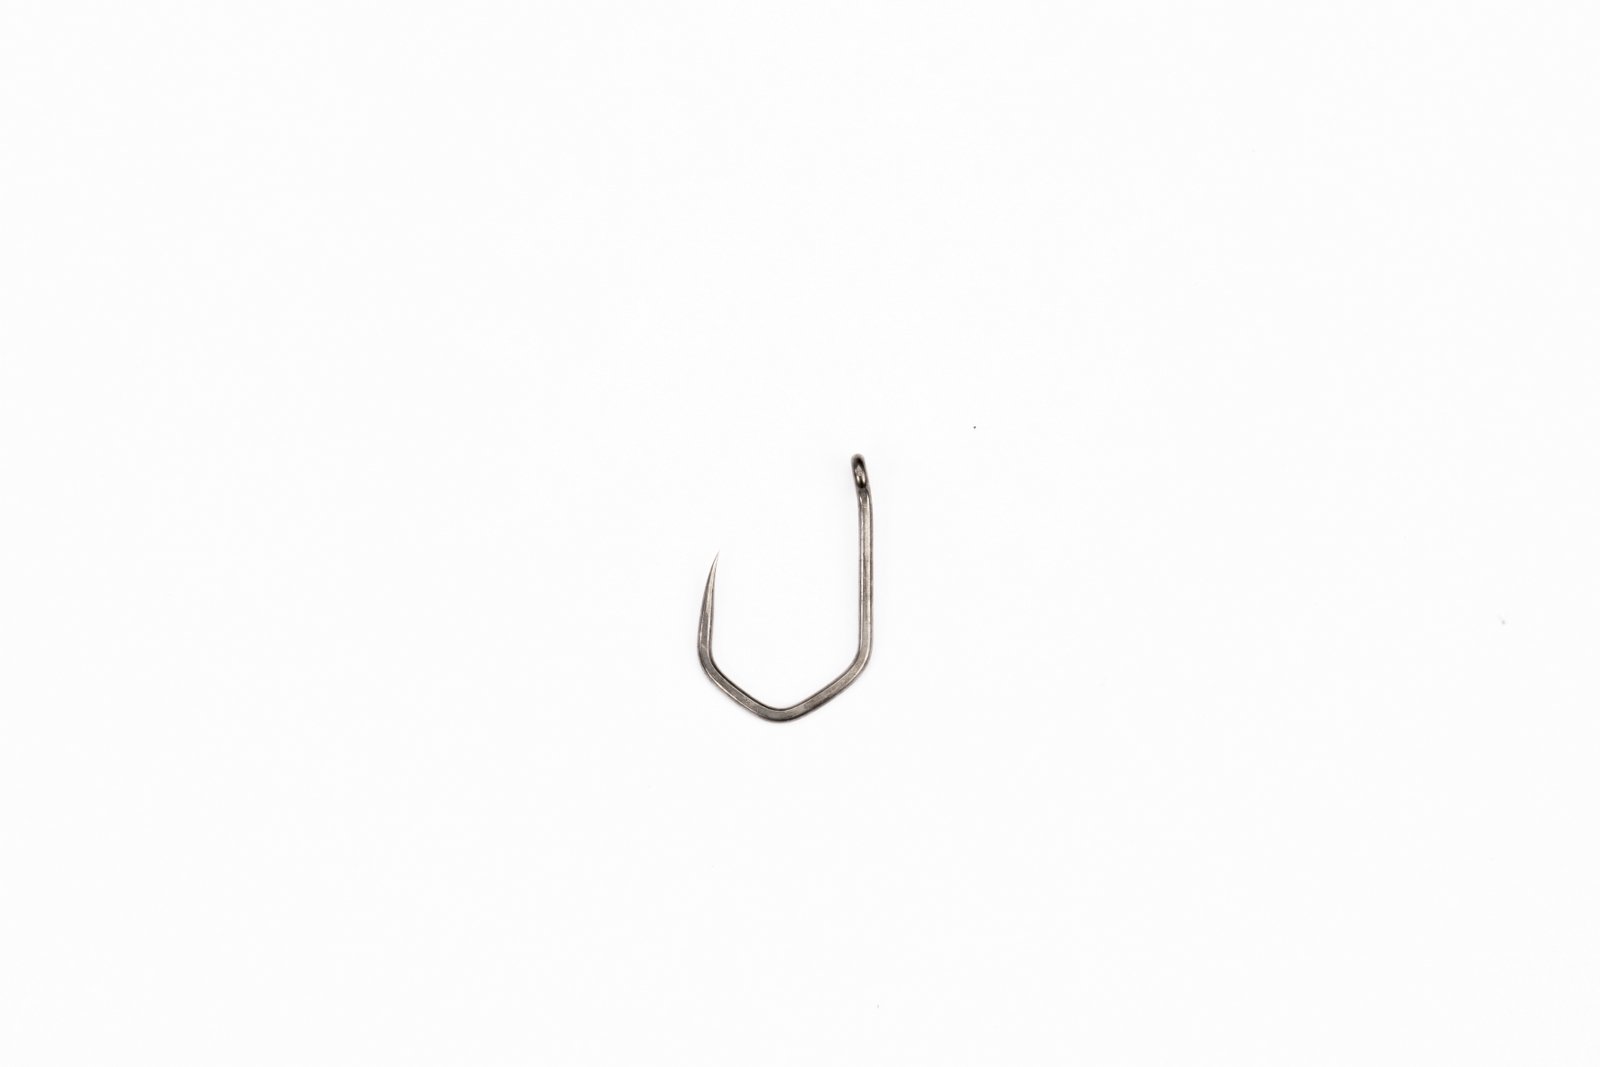 Nash Claw Size 1 Micro Barbed Hooks & Sharpening Tackle T6131 International Shop Europe